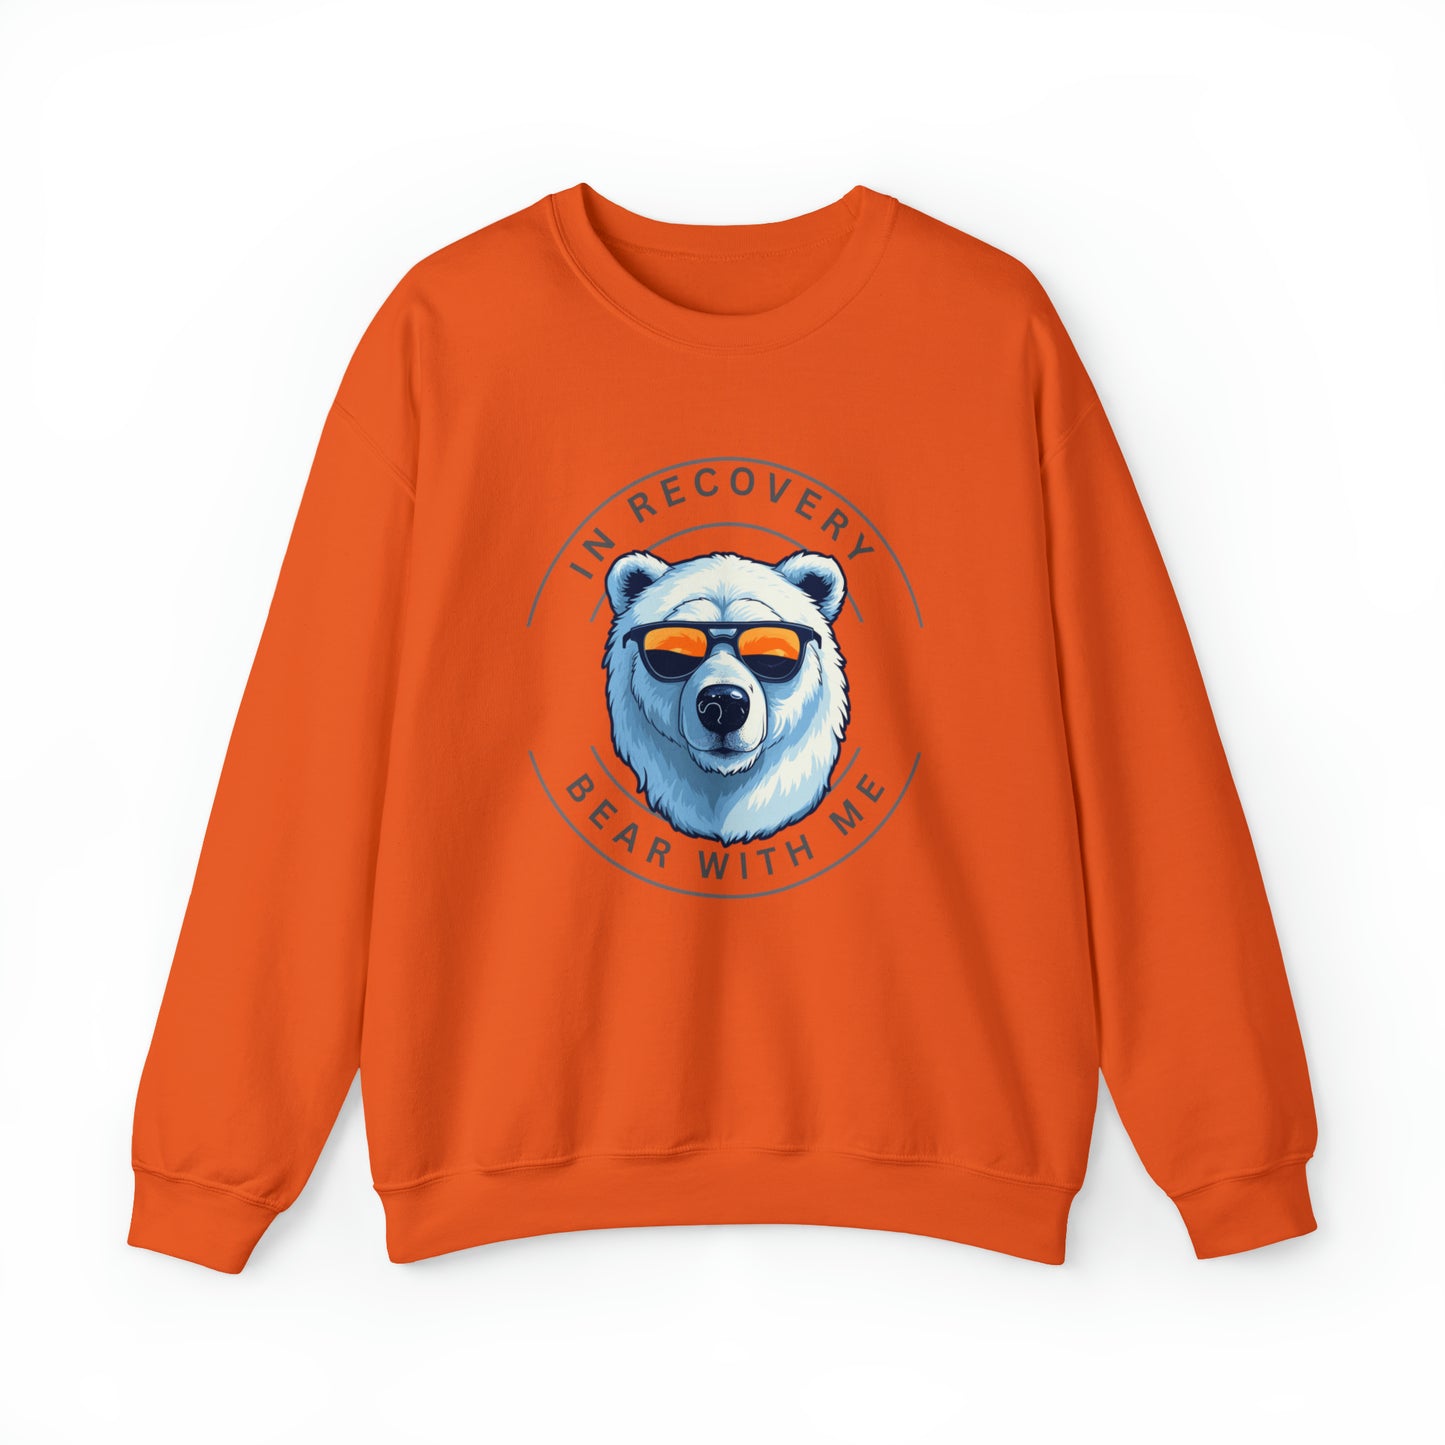 "In Recovery Bear with Me " crewneck sweatshirt from Celebrate Sobriety Gifts.om